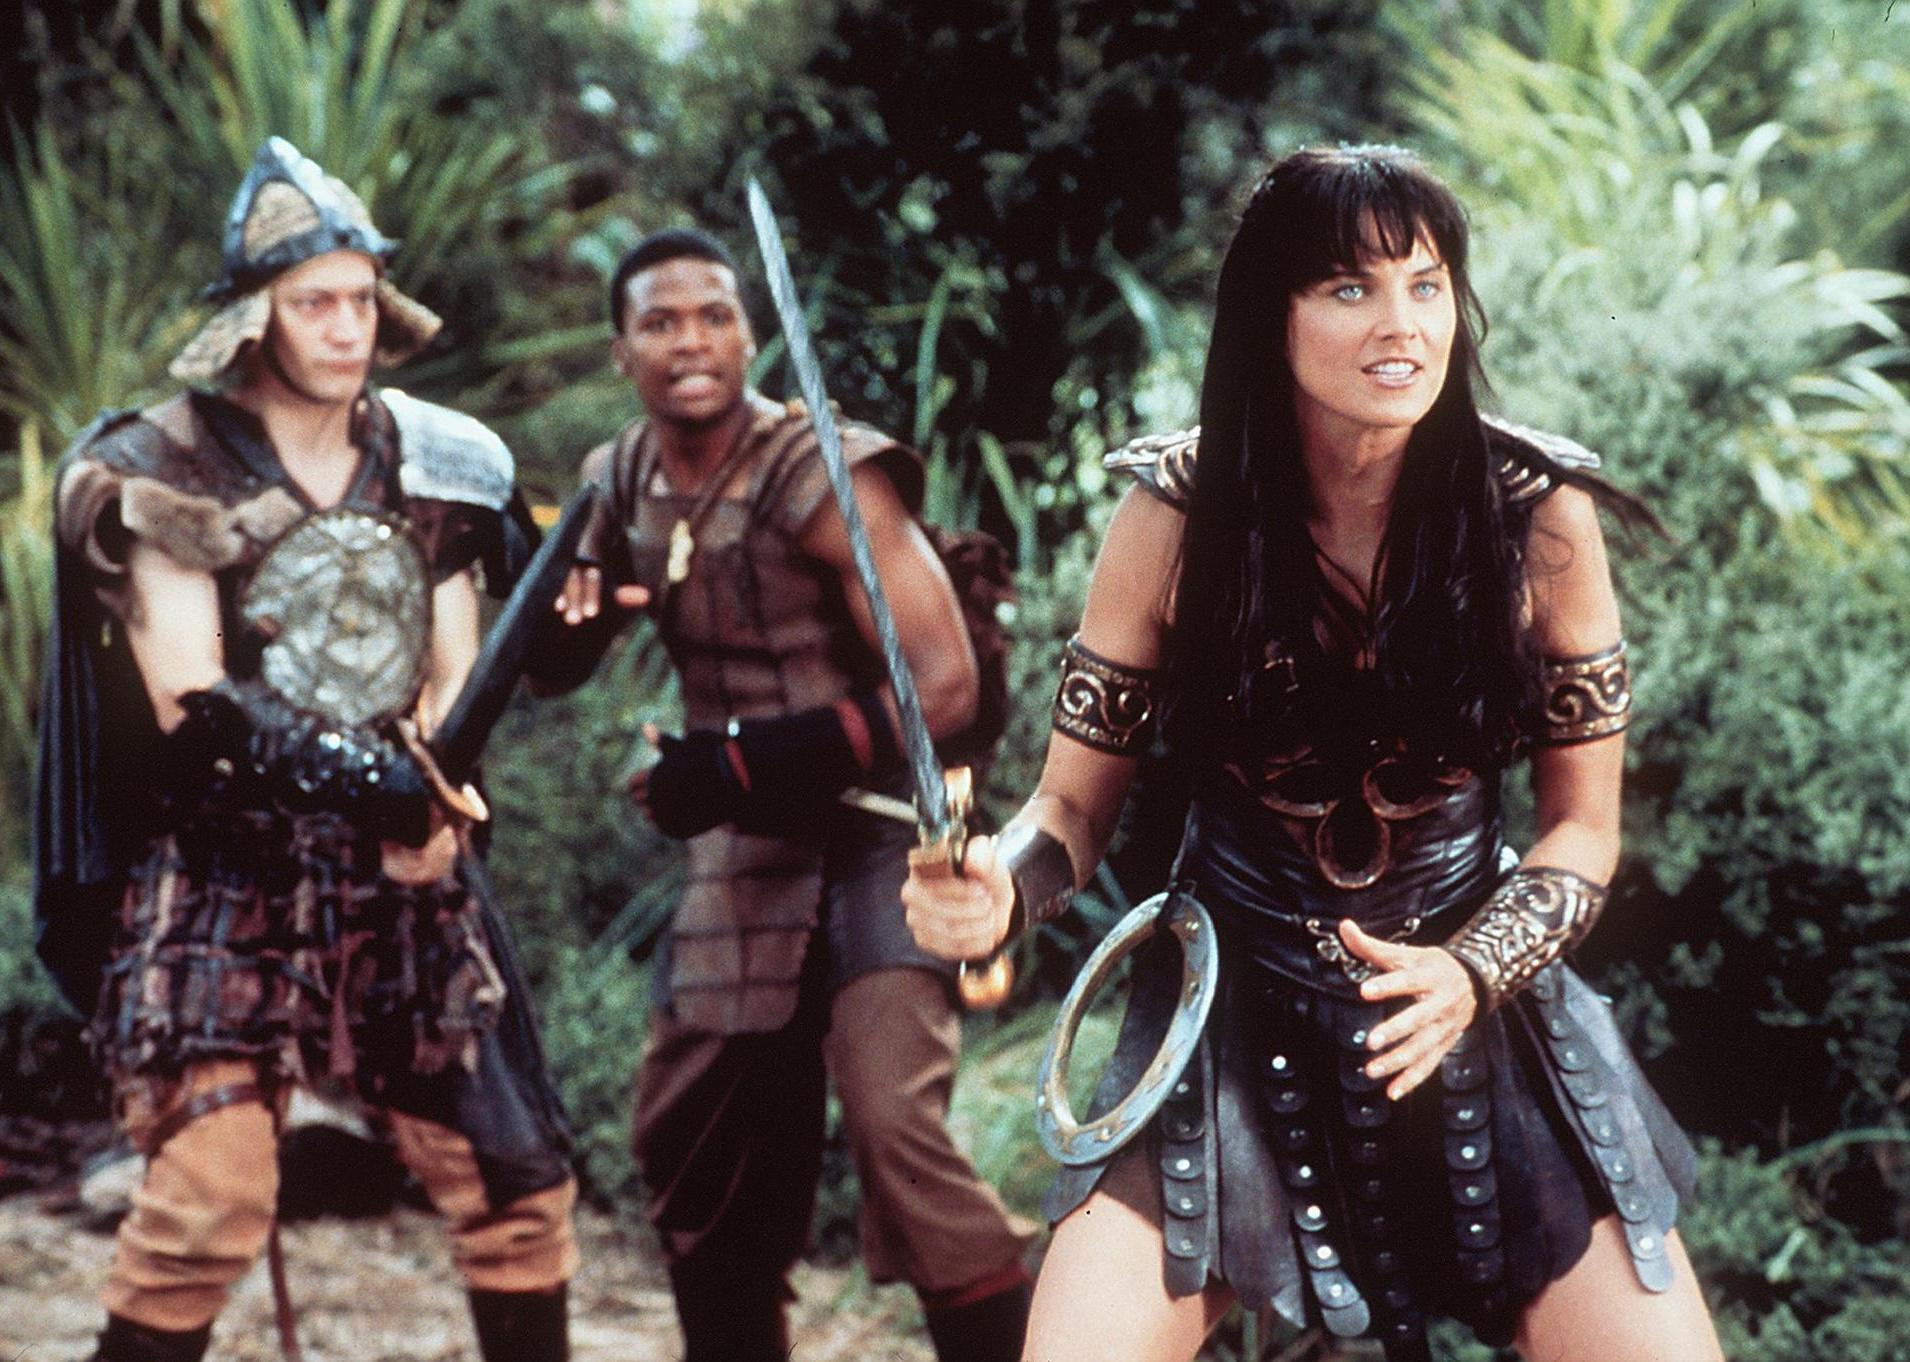 Lucy Lawless as Xena and other warriors engaged in battle with swords.